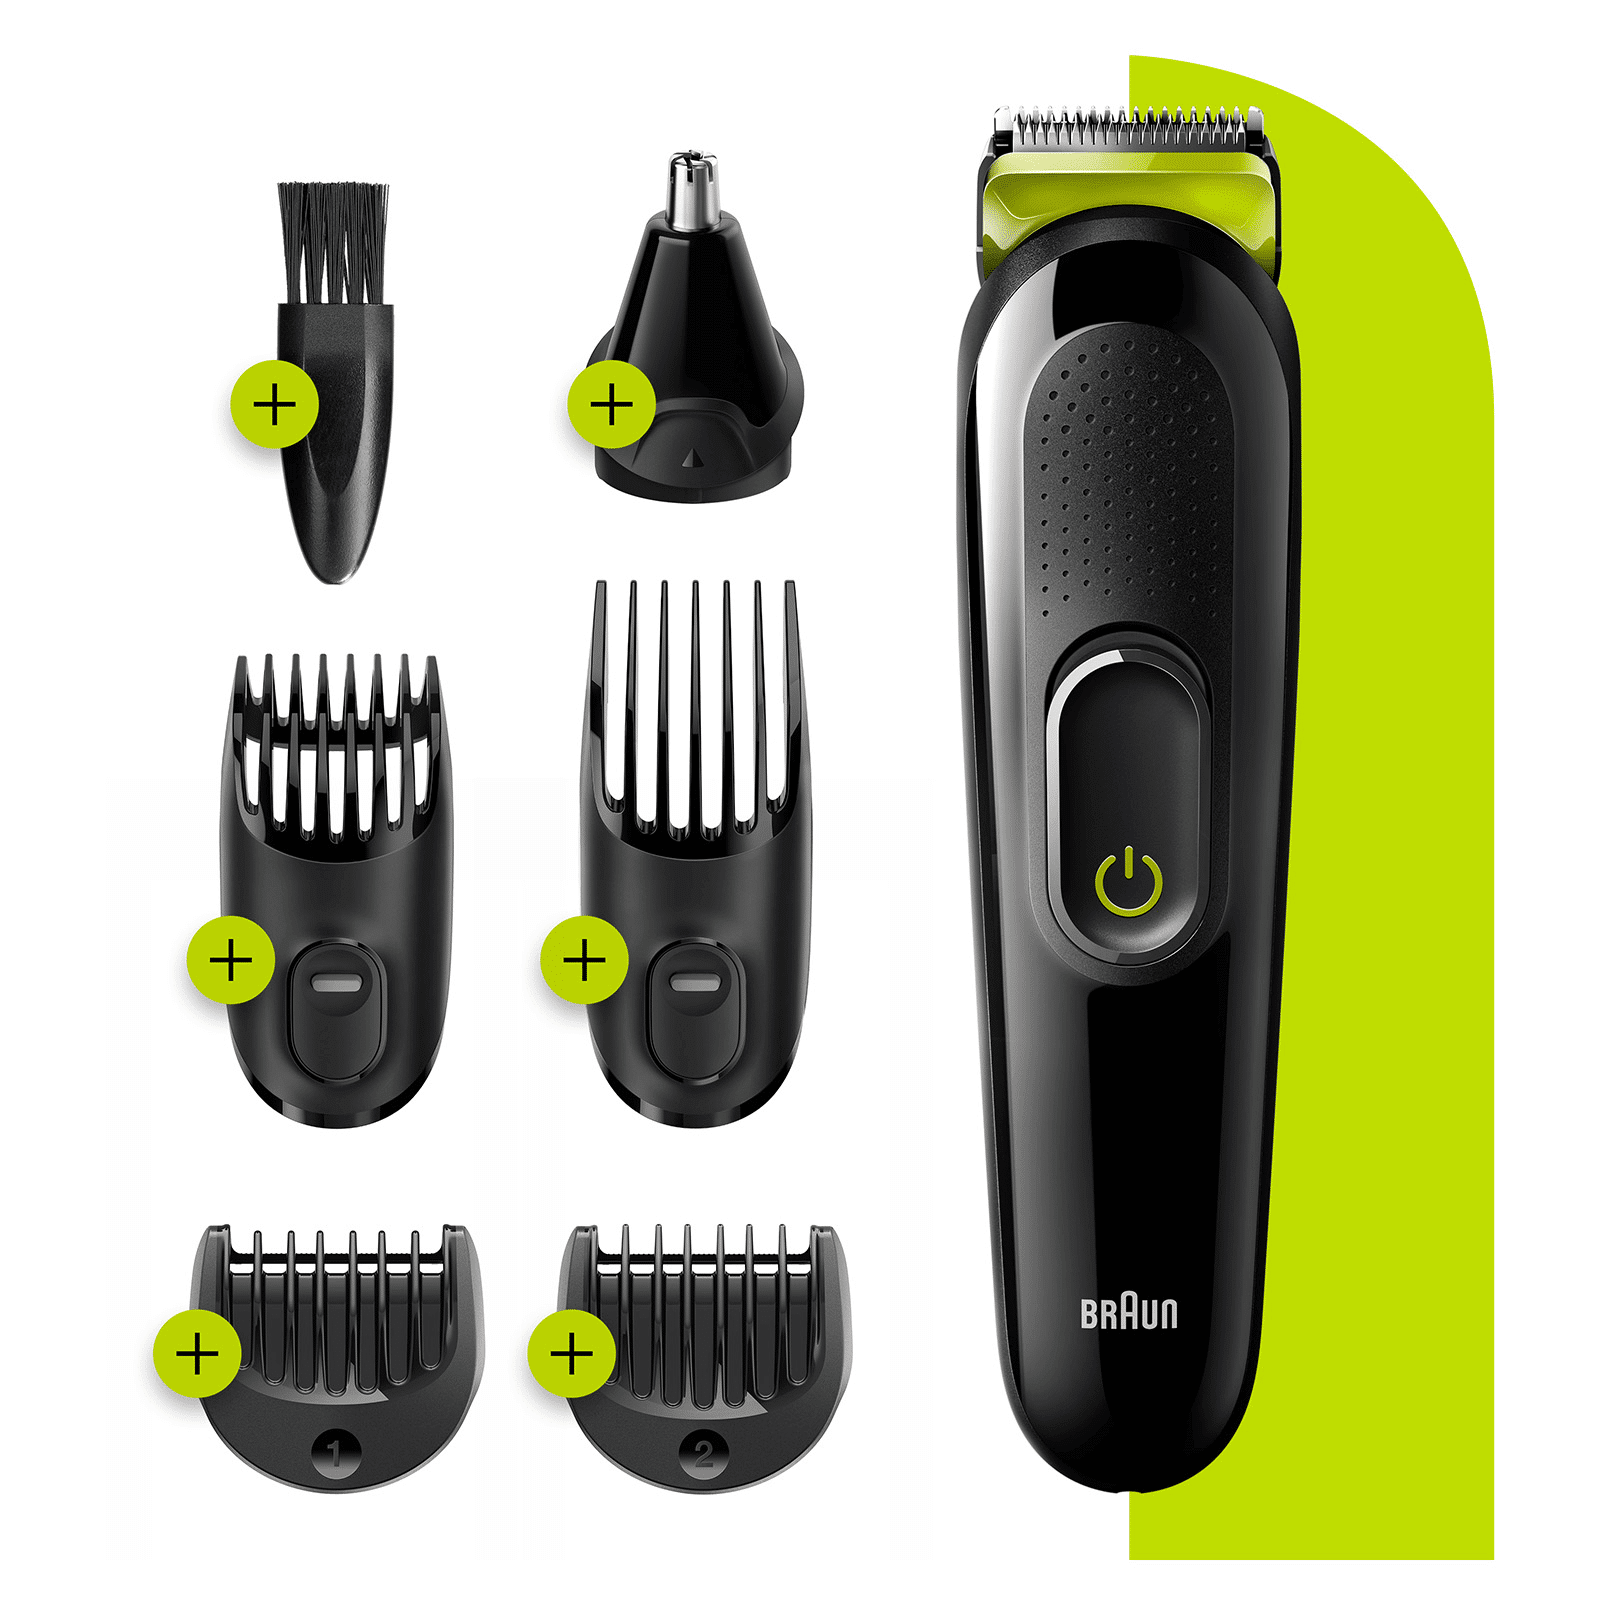 Braun All-in-one Trimmer 3 - 4 Combs + Ear & Nose Trimmer